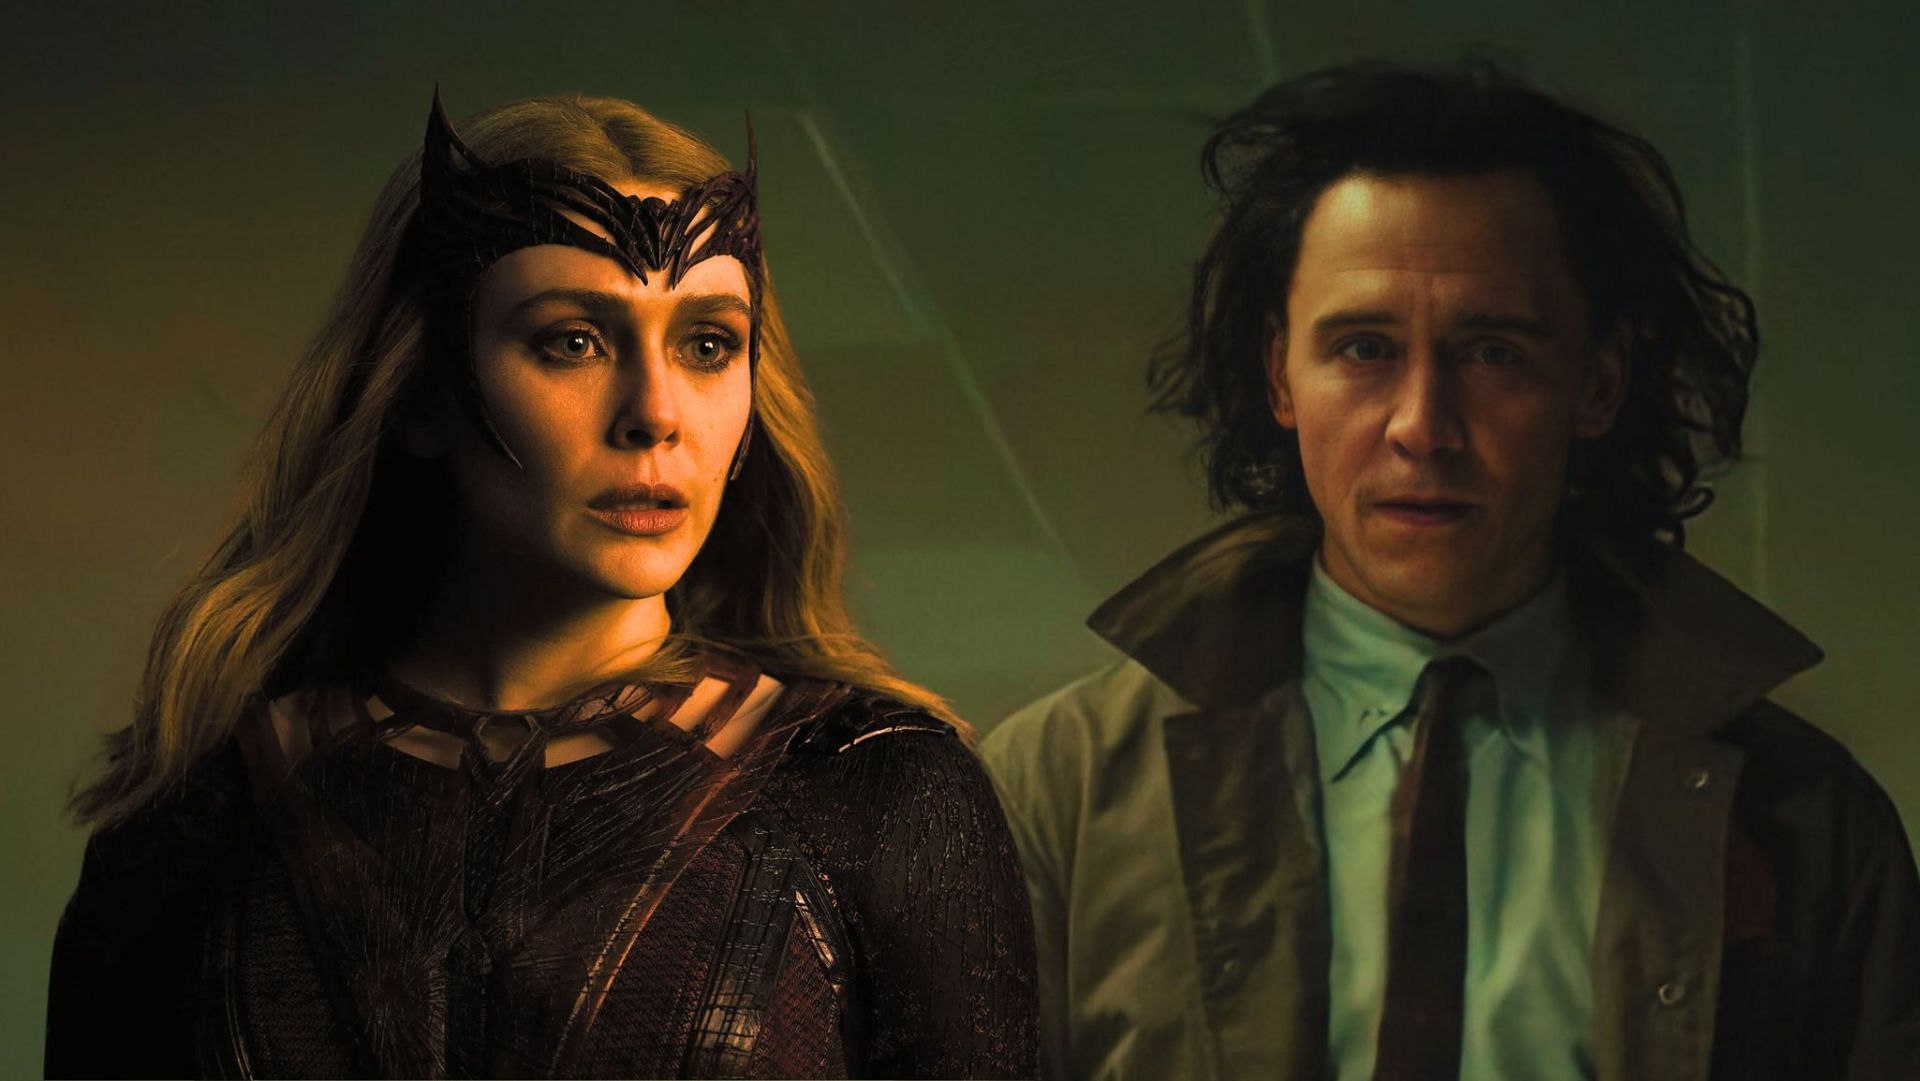 Love in the realm of chaos: Loki and Scarlet Witch unite in an unforeseen union (Image via Sportskeeda)